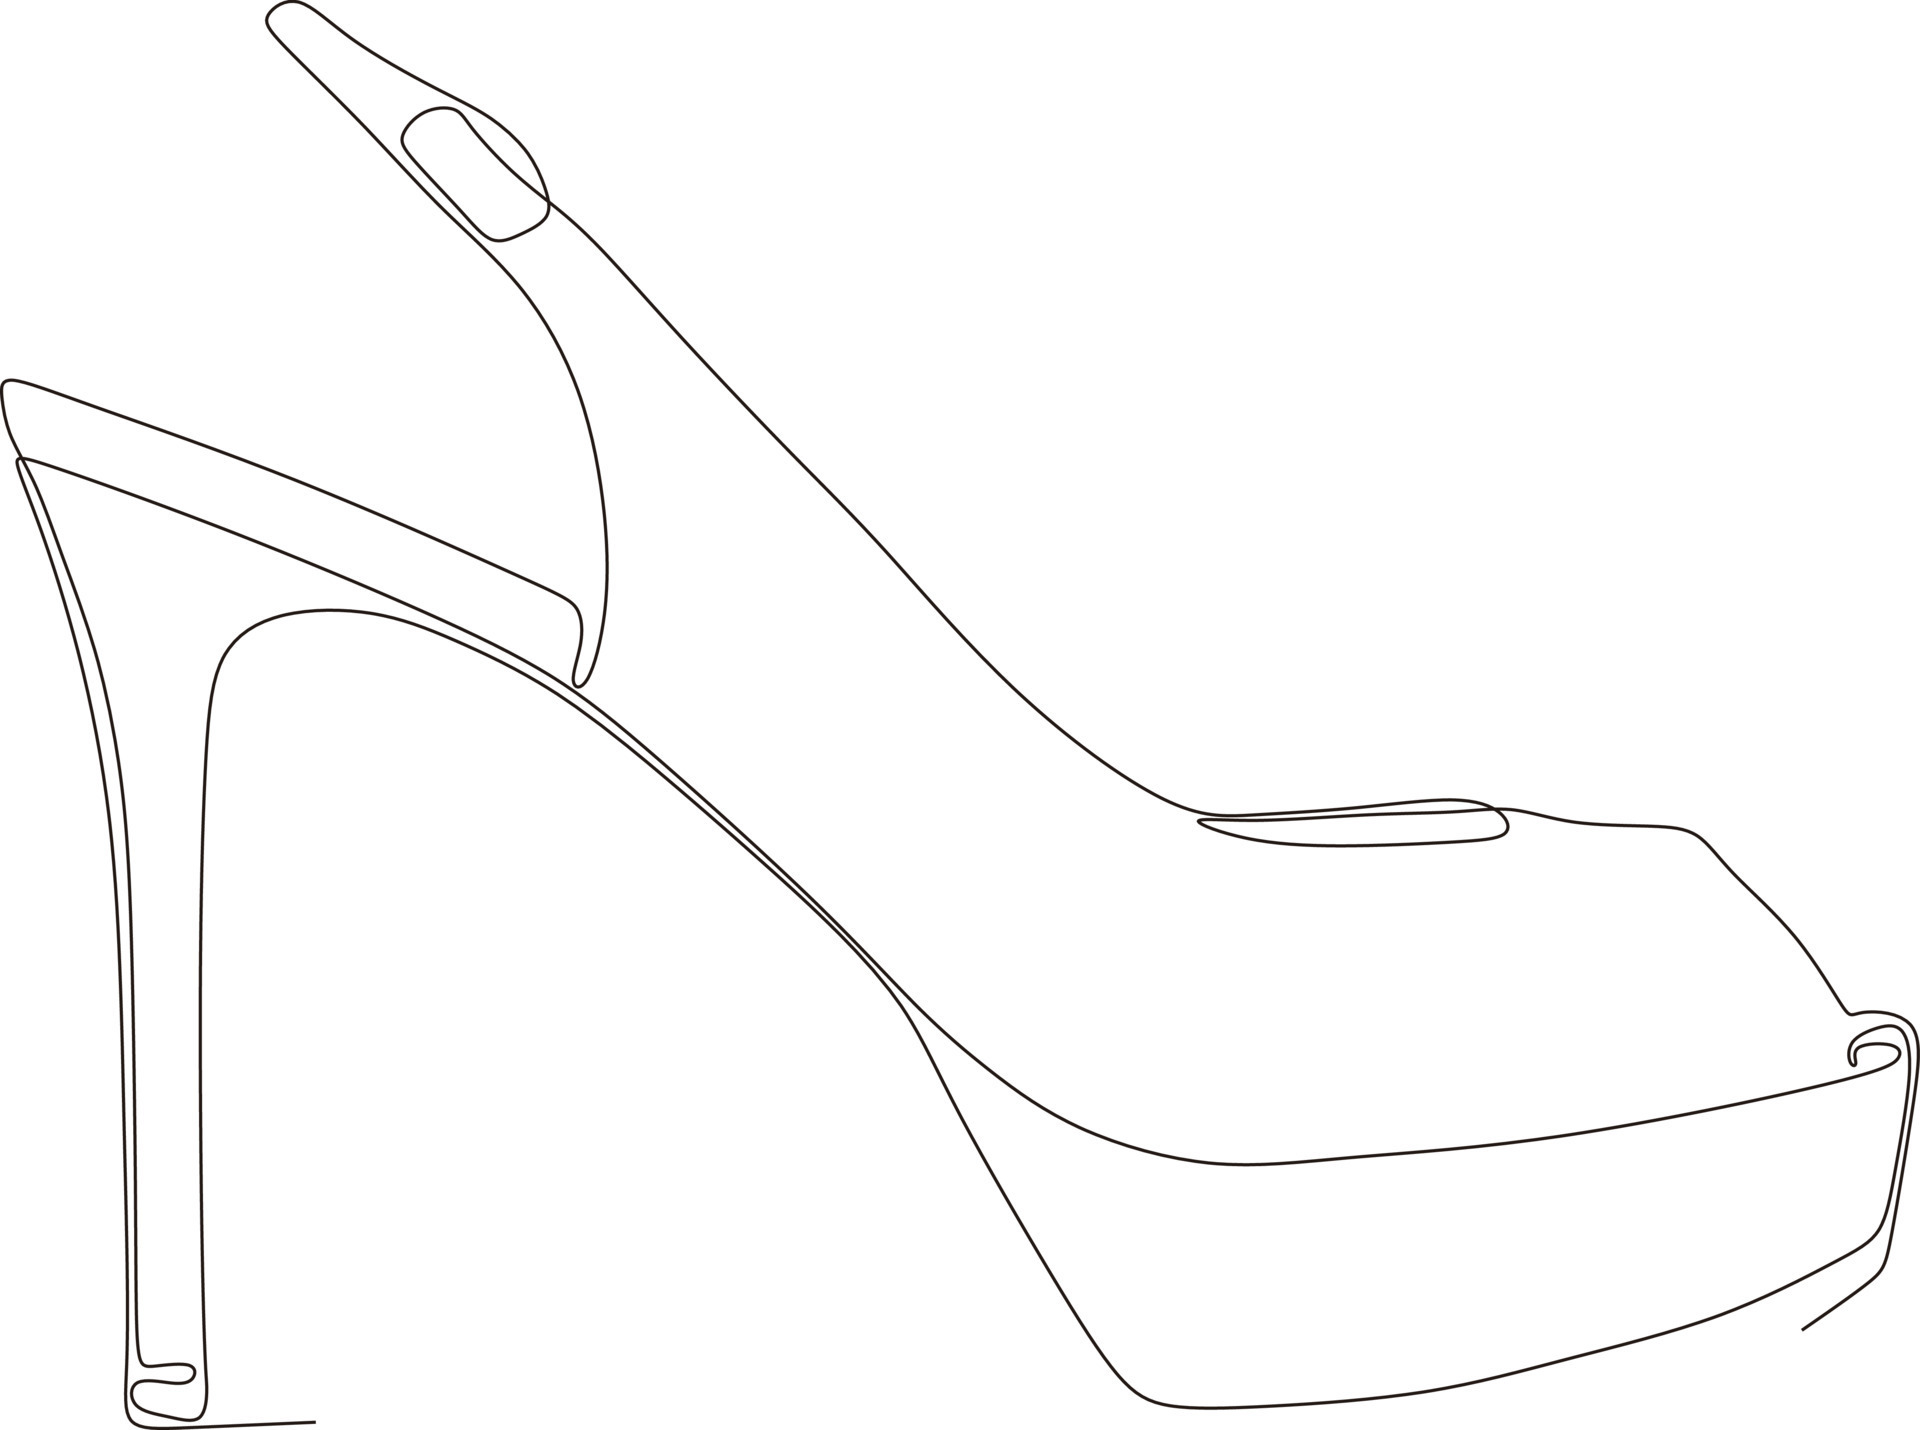 continuous line art drawing of women's sandals with high heels in black ...